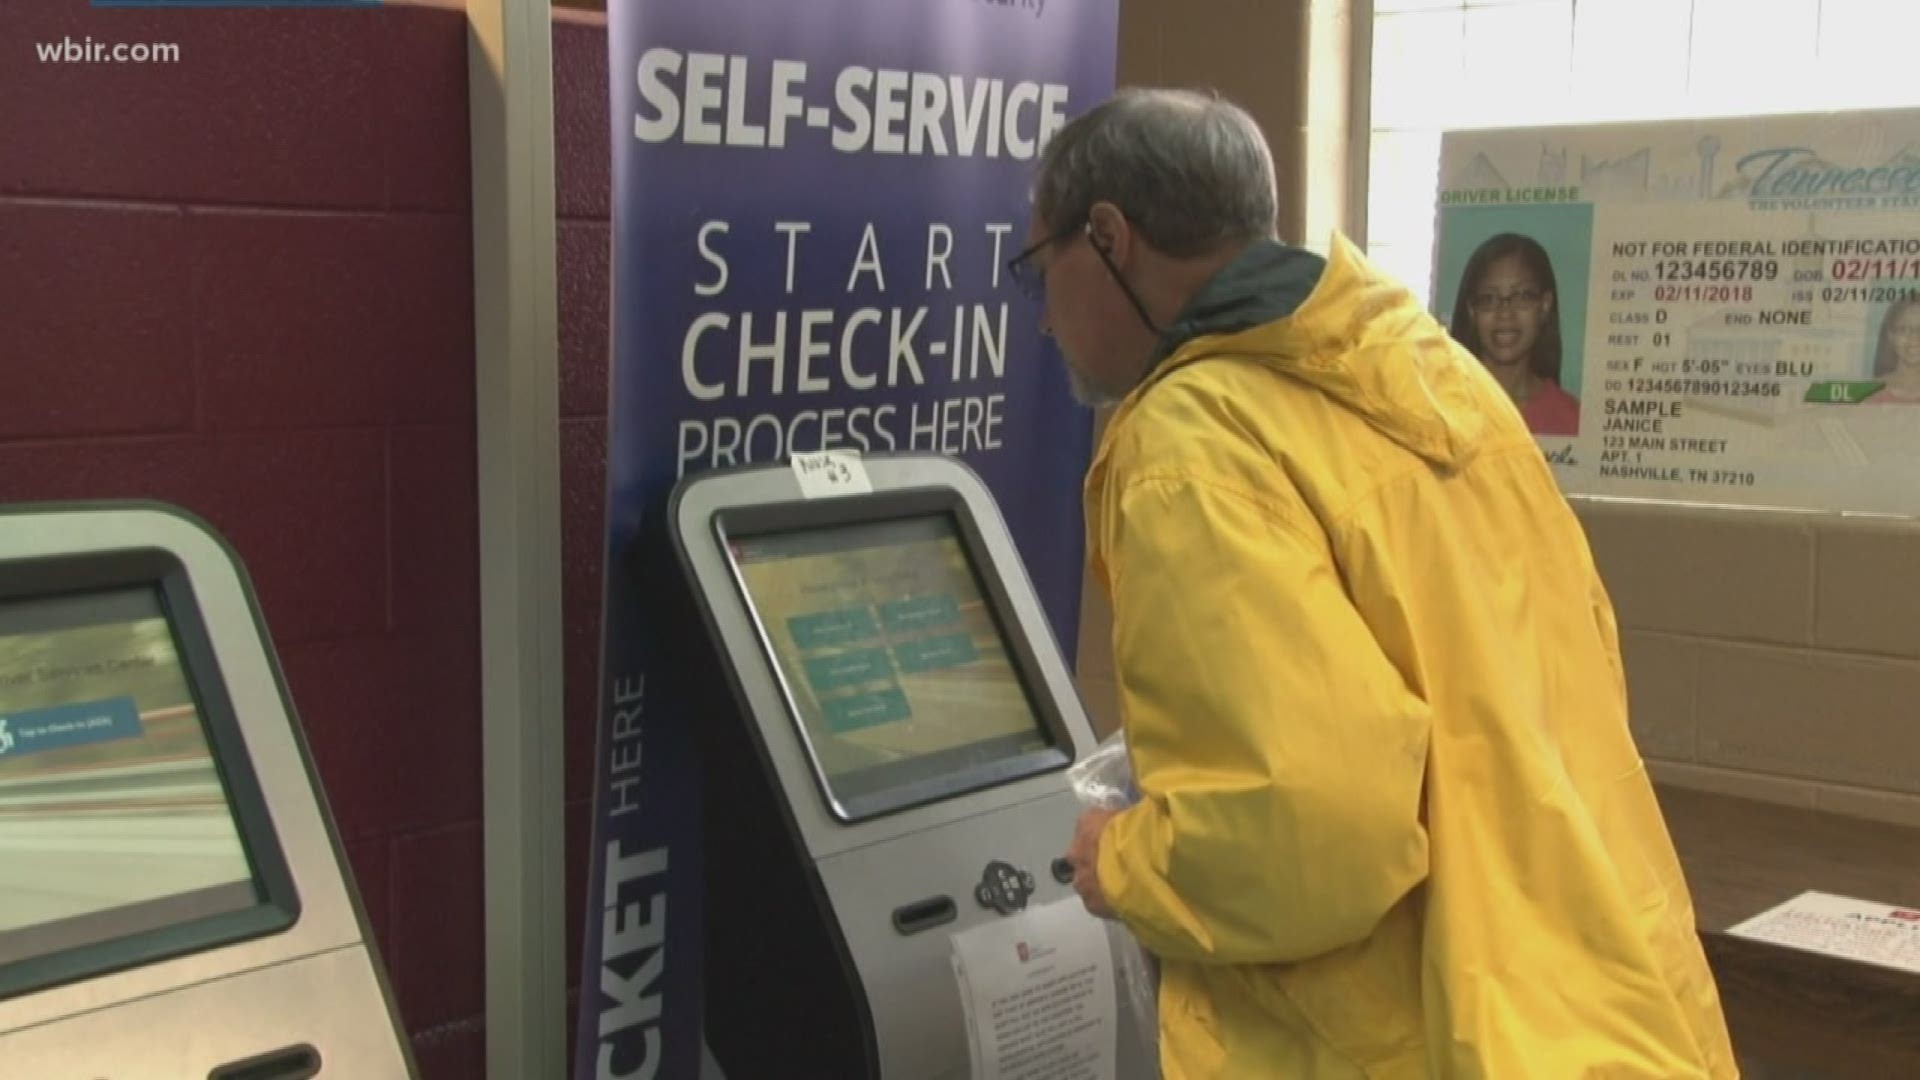 Since Real ID licenses went into effect, nearly every driver services center in East Tennessee has seen wait times go up. Officials say lines may get even longer.